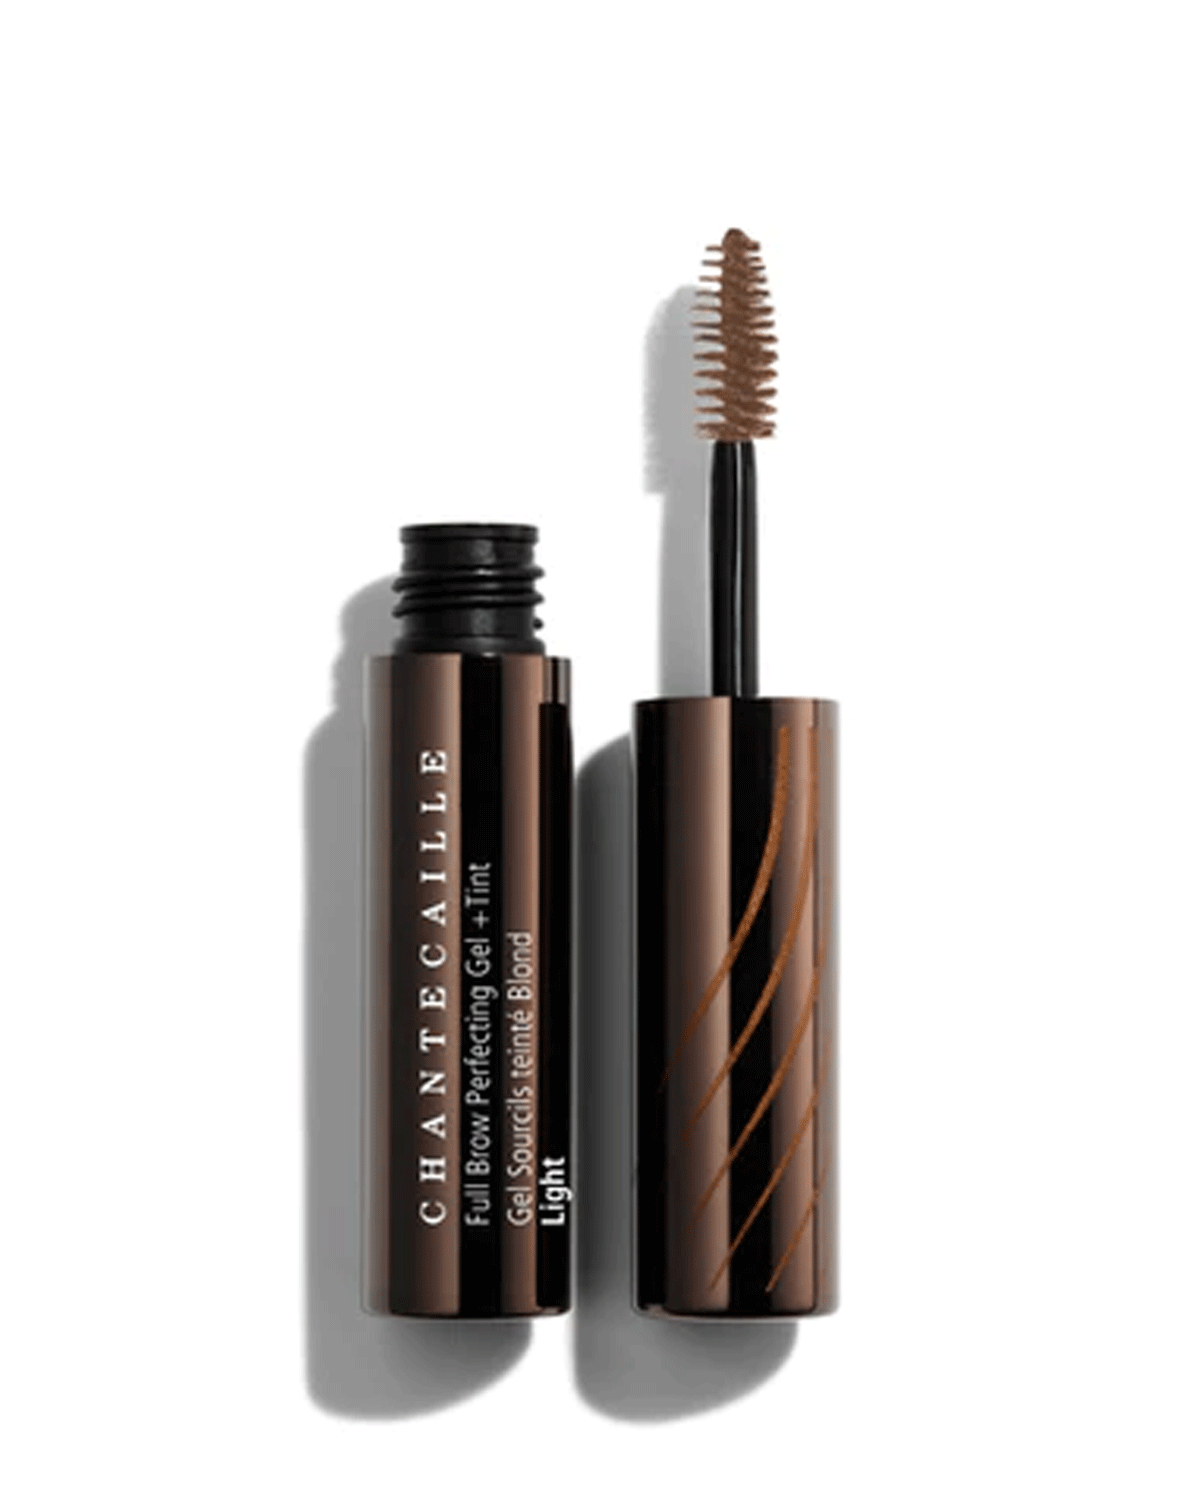 Brow Perfecting Gel and Tint in Light